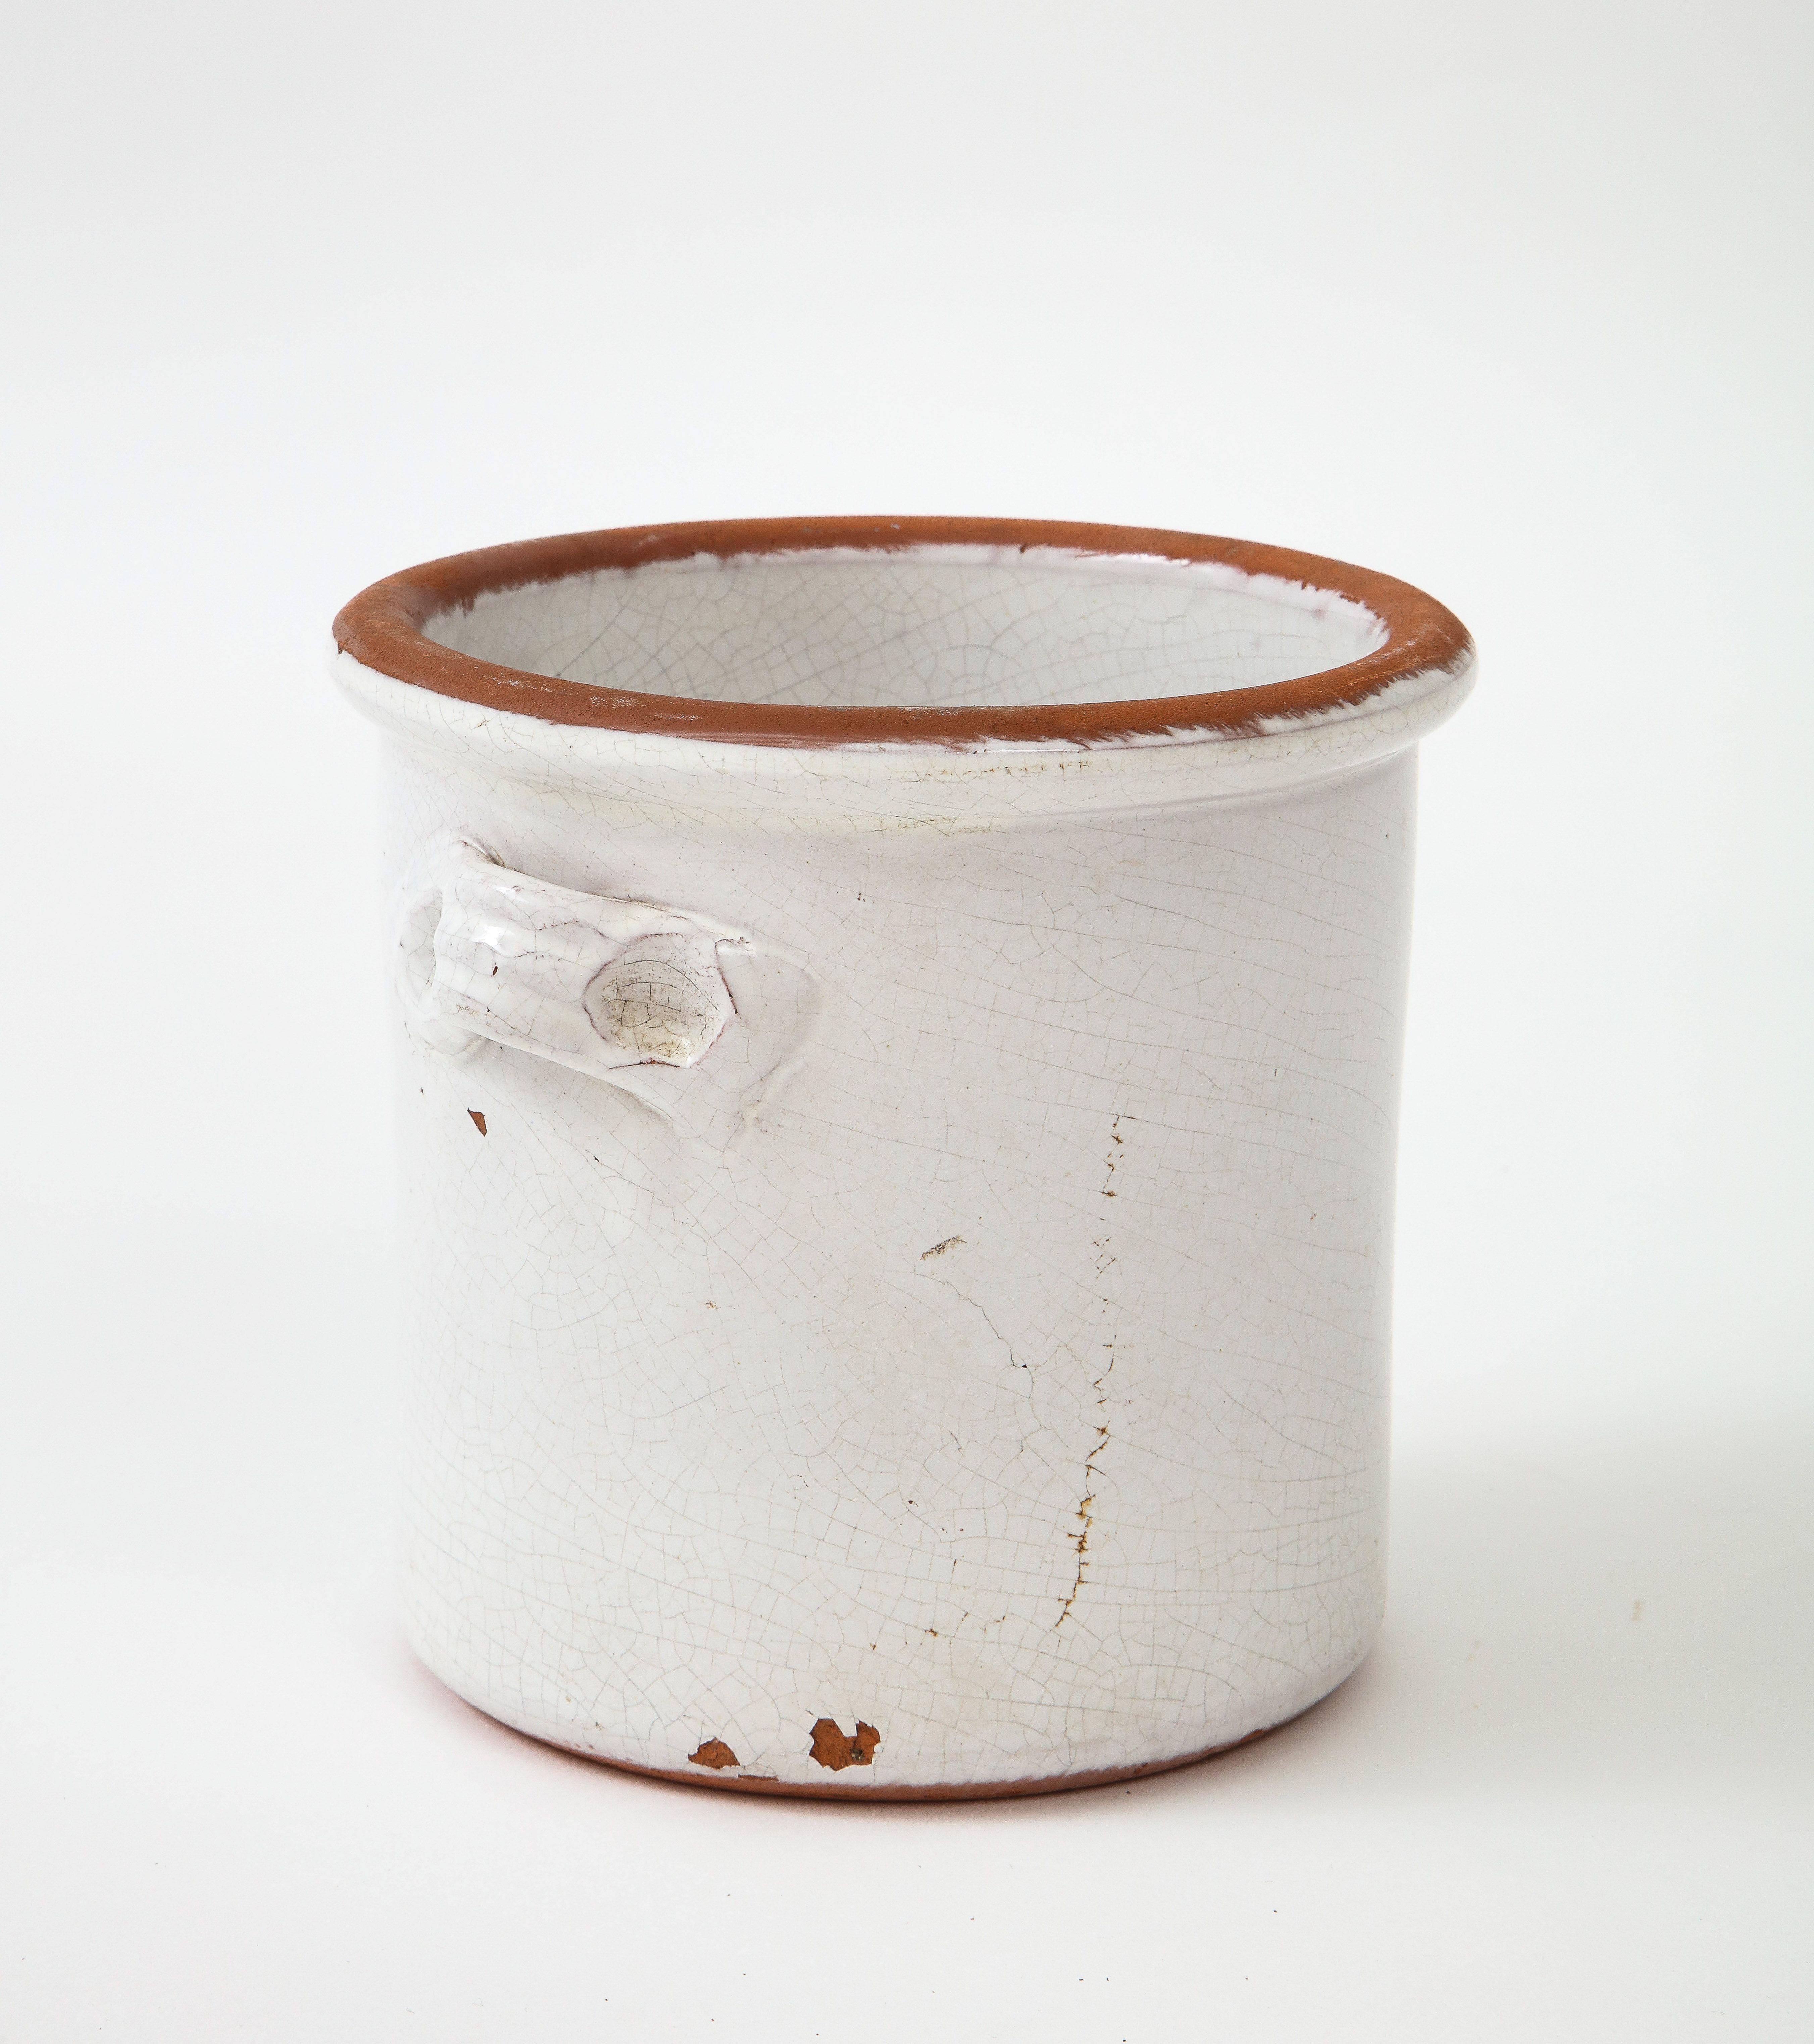 19th century French confit pot or jar. Handcrafted and with the traditional two handles. Originally used to store and preserve food.